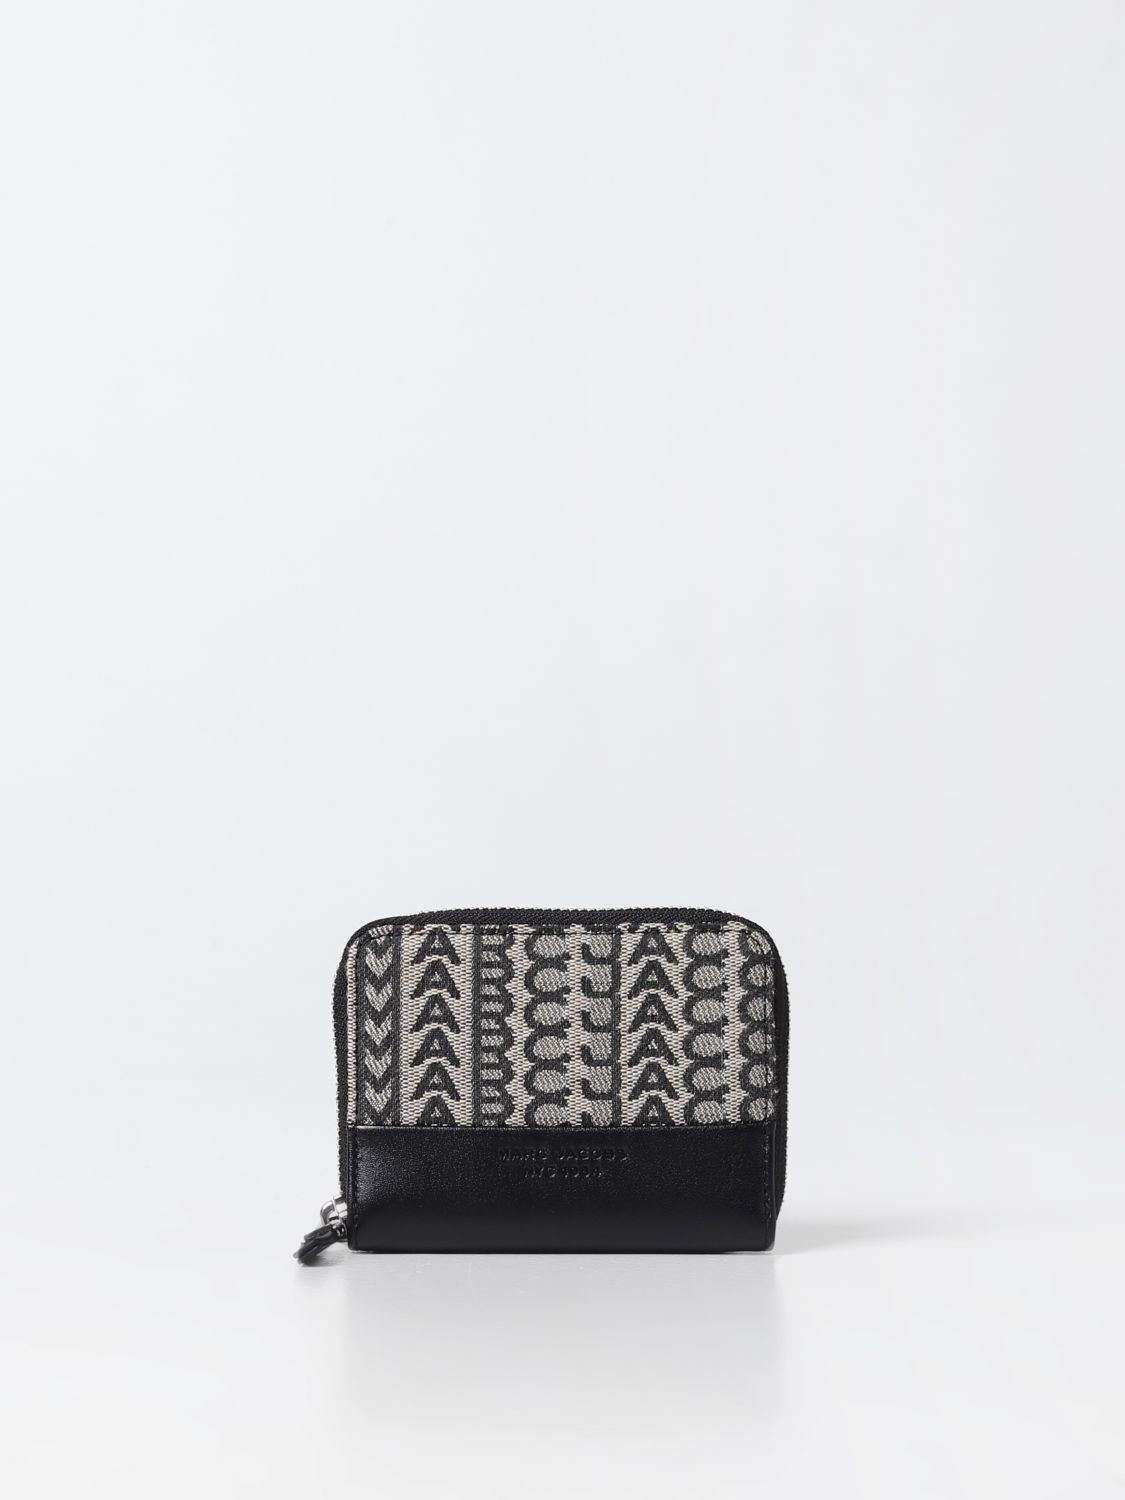 MARC JACOBS WALLET IN JACQUARD COTTON AND LEATHER,E48475022